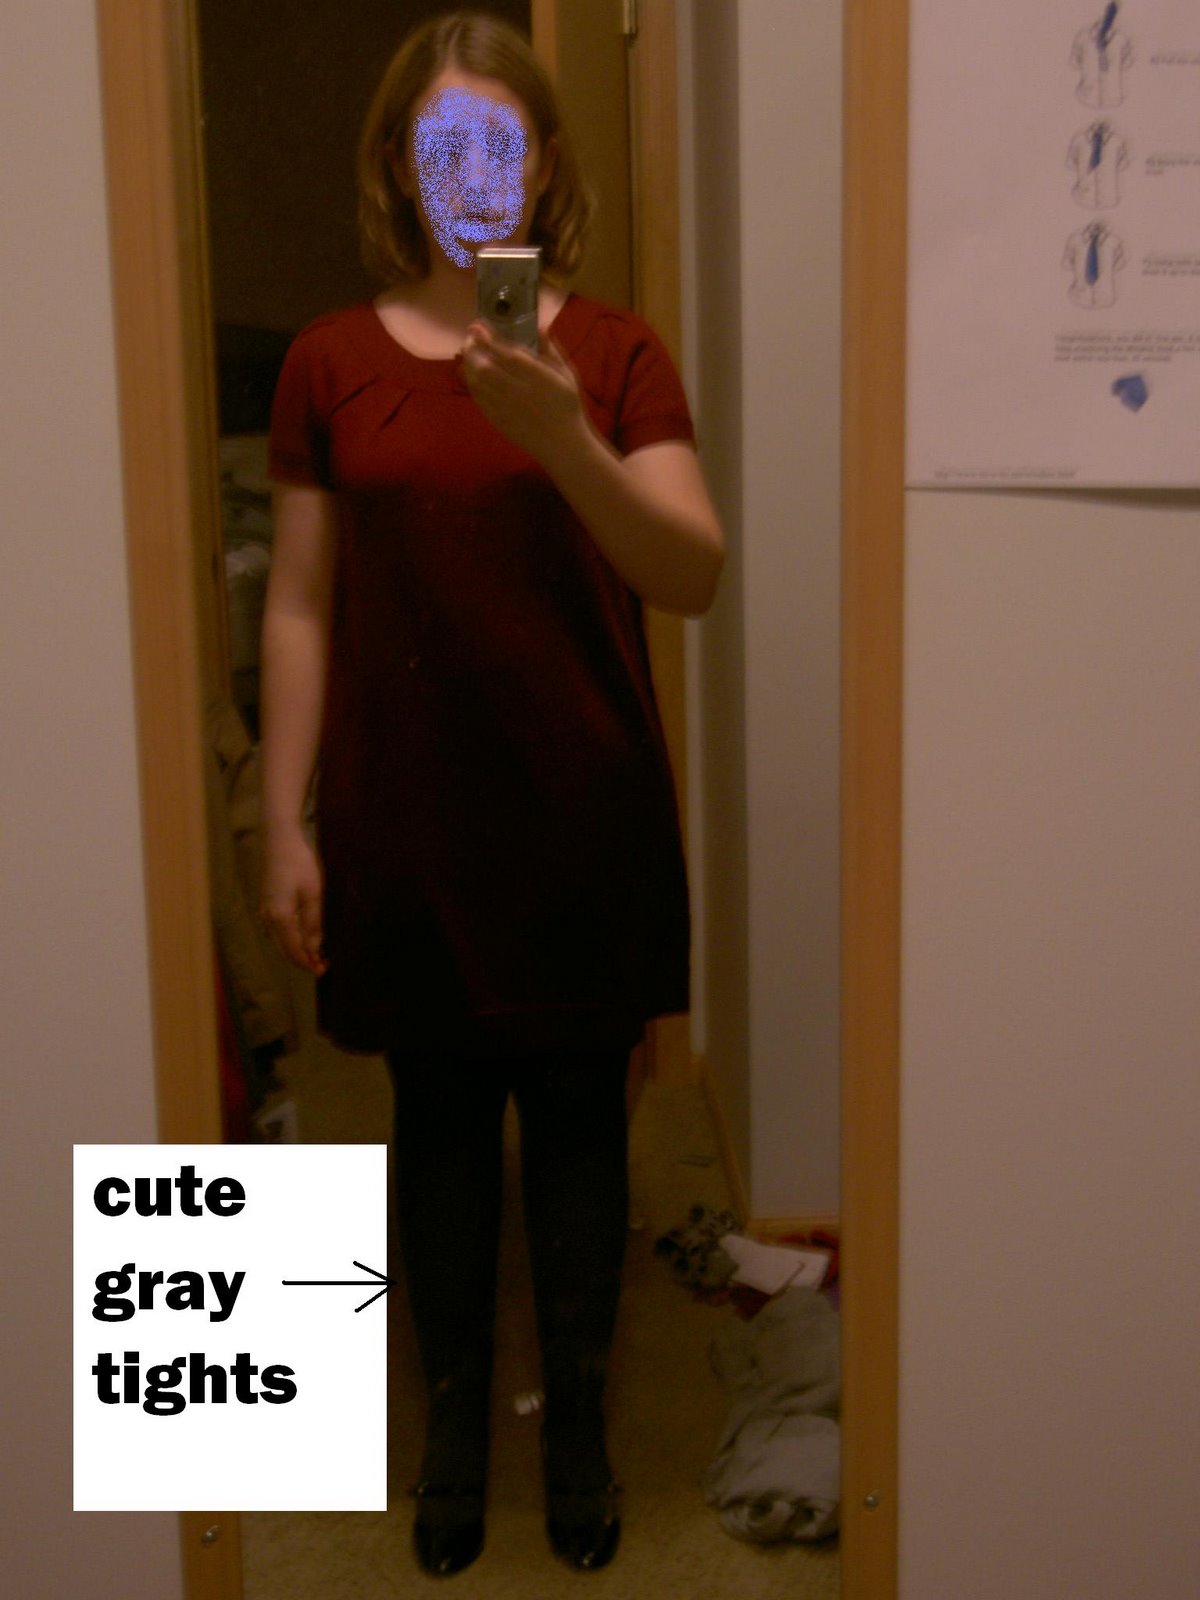 [Bad+Picture+of+Me+In+Dress.JPG]